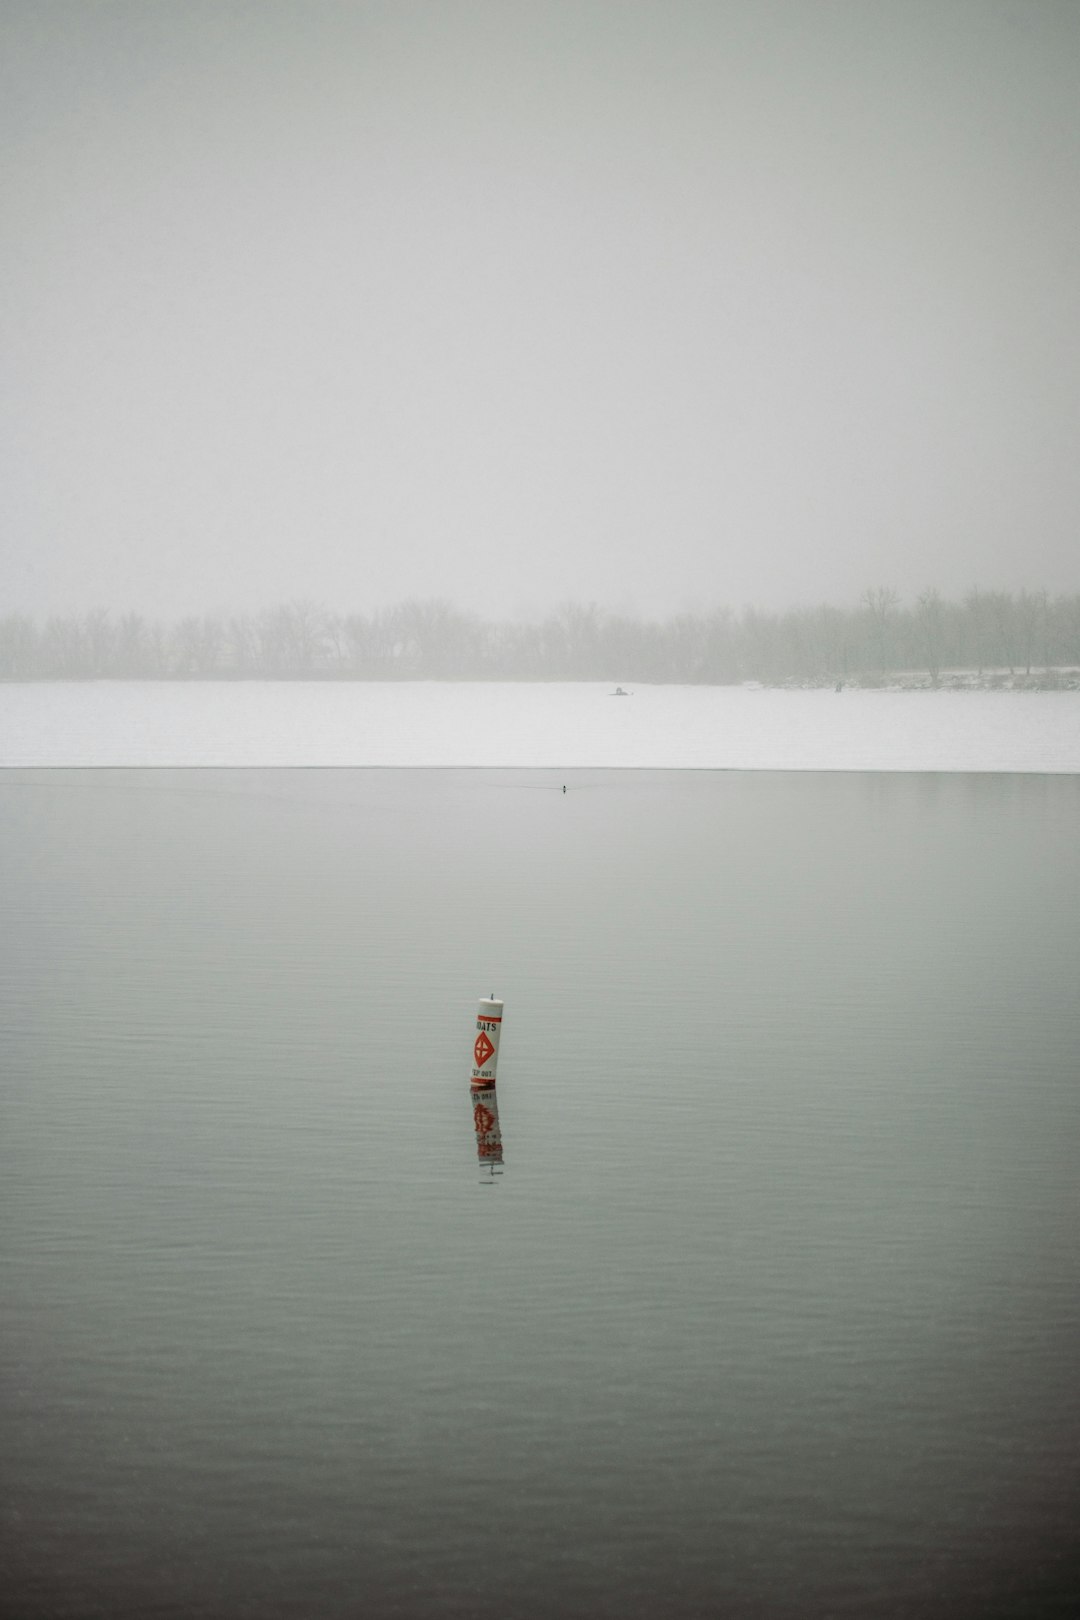 person in red shirt standing on body of water during foggy weather